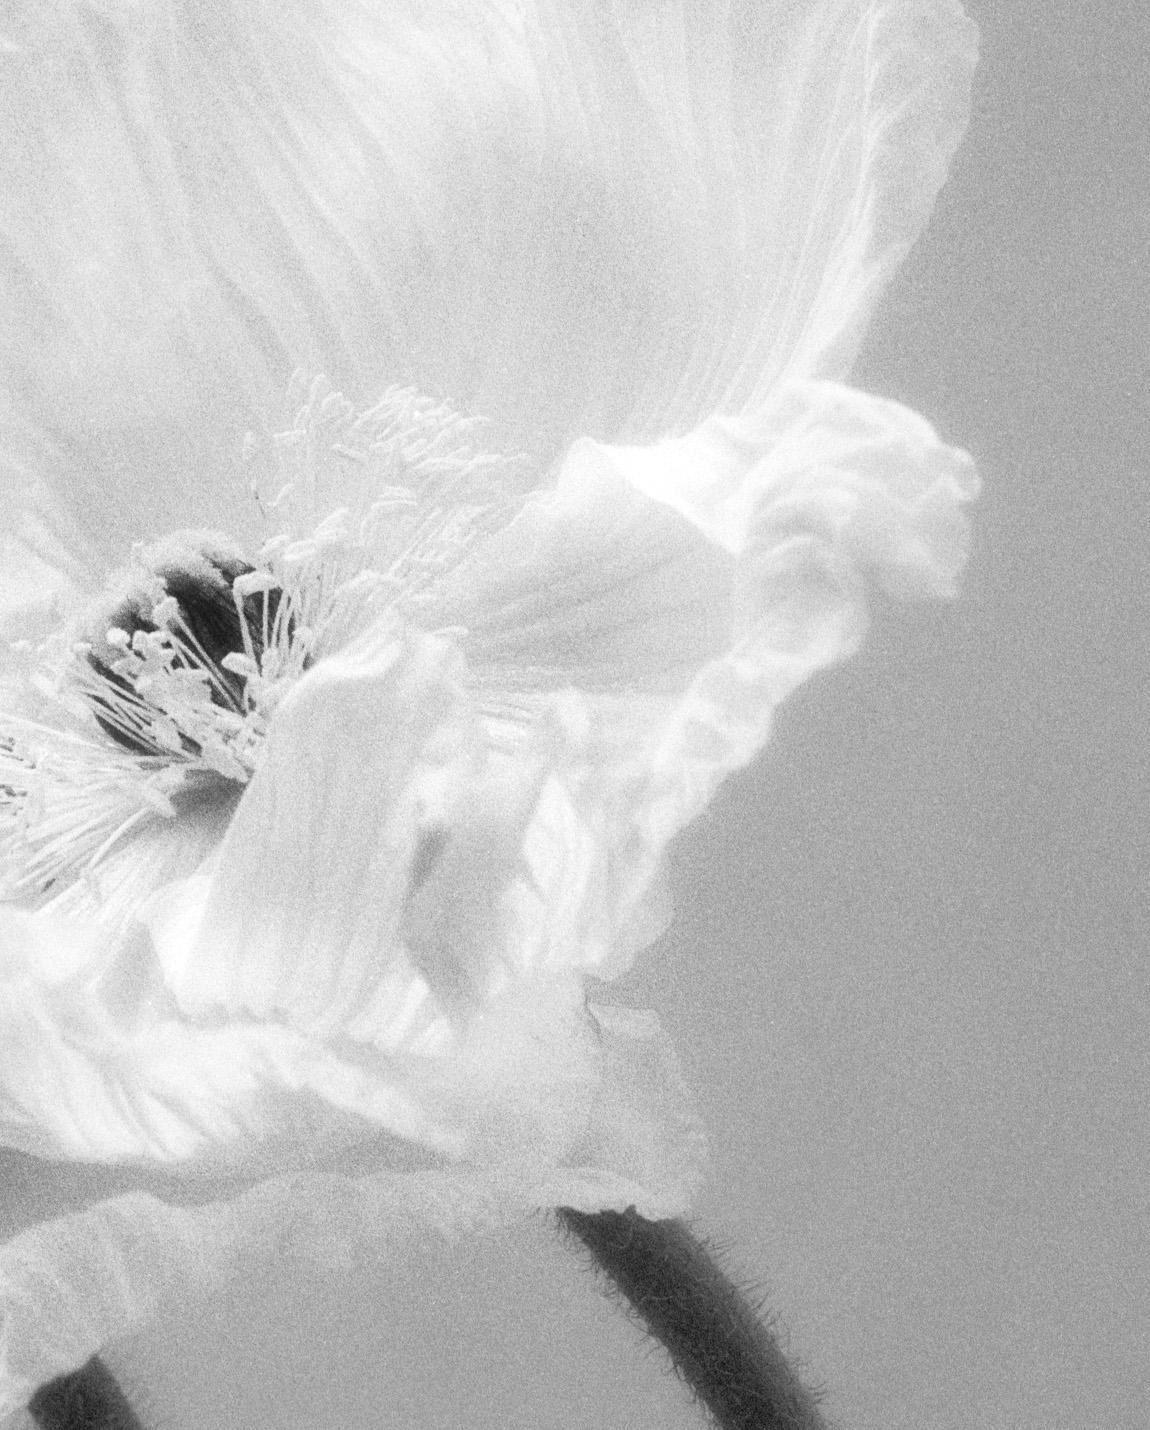 Coupled Poppies - analogue black and white floral photography, Ltd. 15 - Photograph by Ugne Pouwell